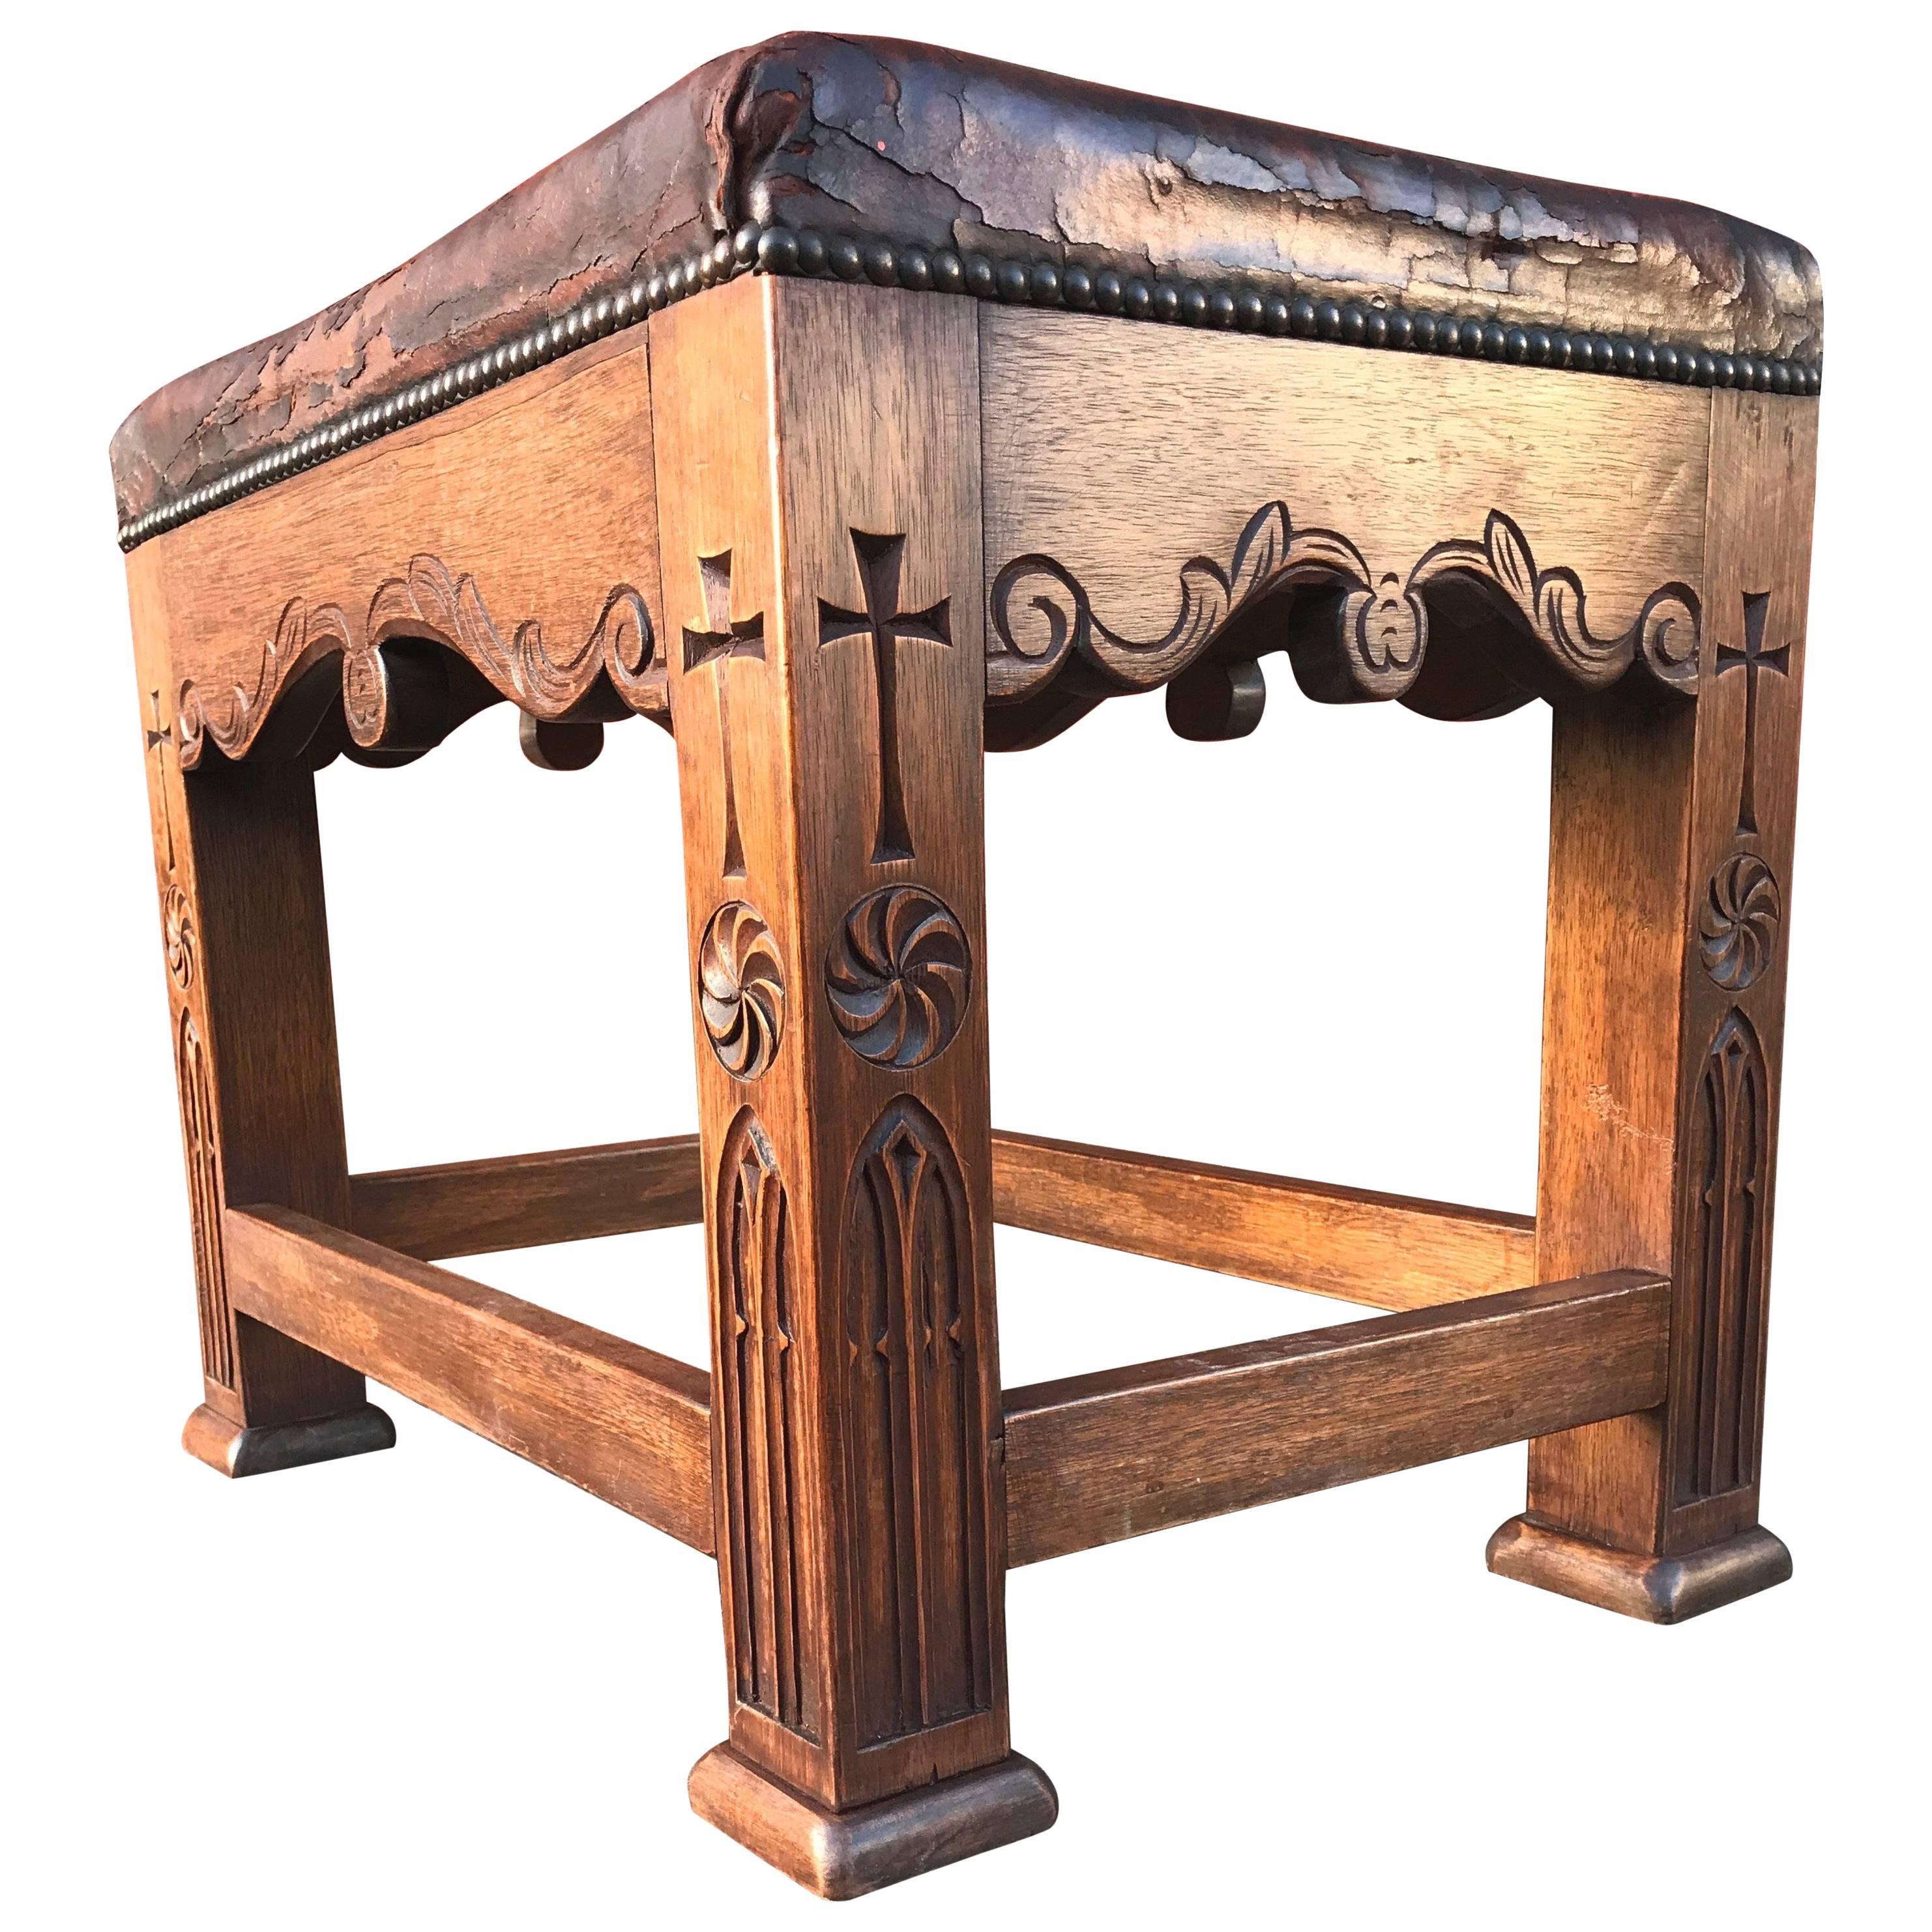 Unique and Quality Carved Gothic Revival Oak Stool with Original Leather Seating